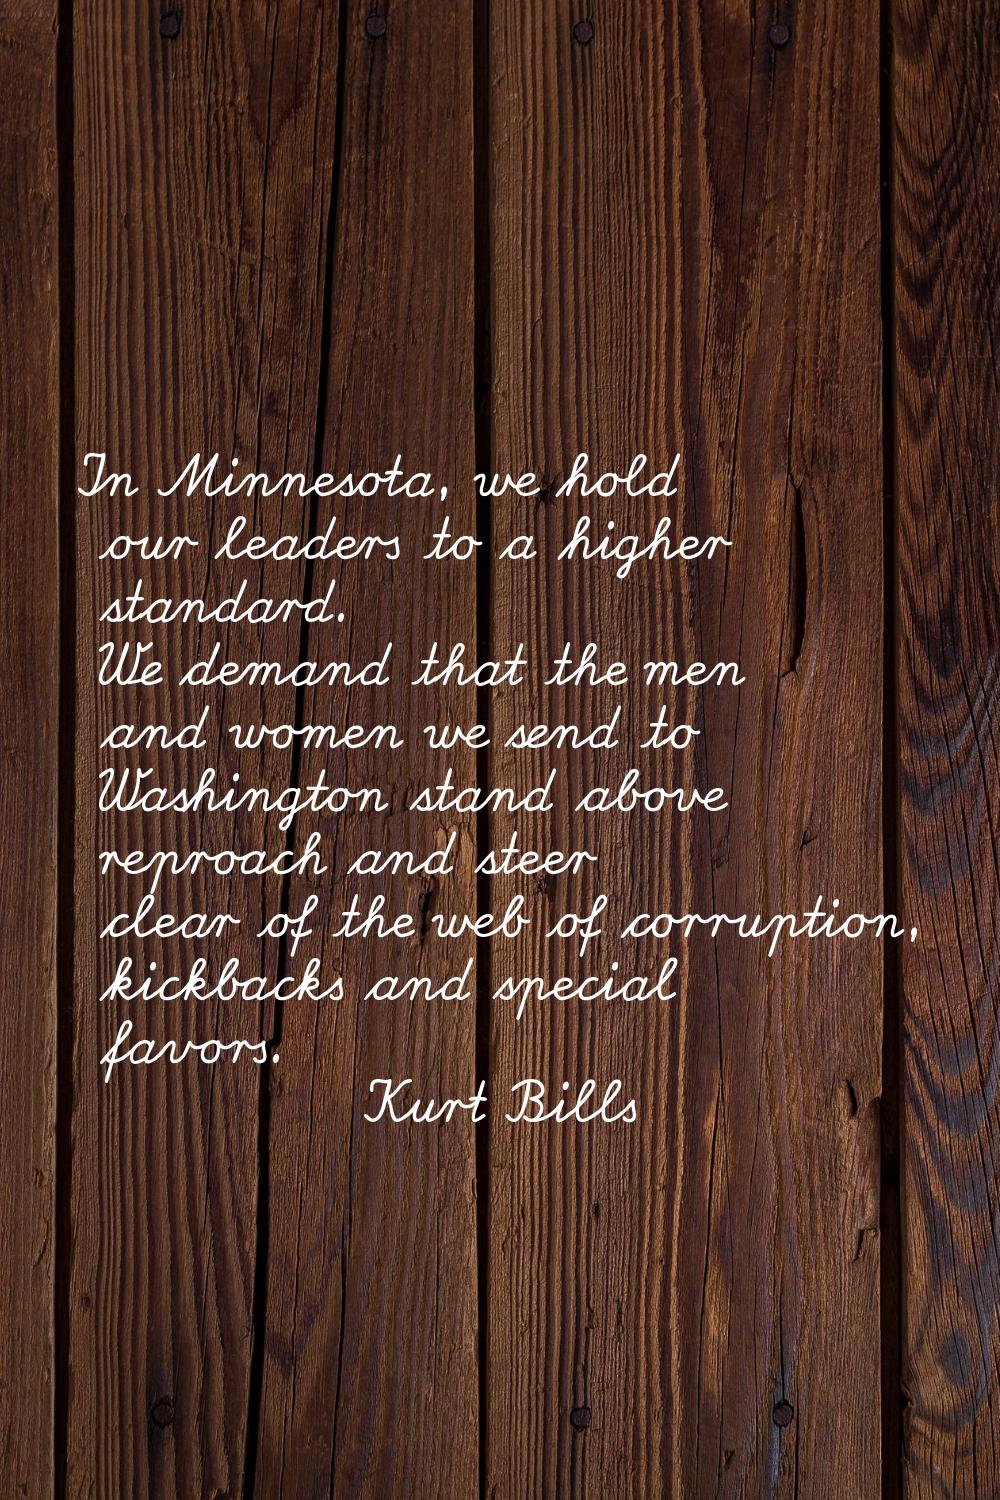 In Minnesota, we hold our leaders to a higher standard. We demand that the men and women we send to